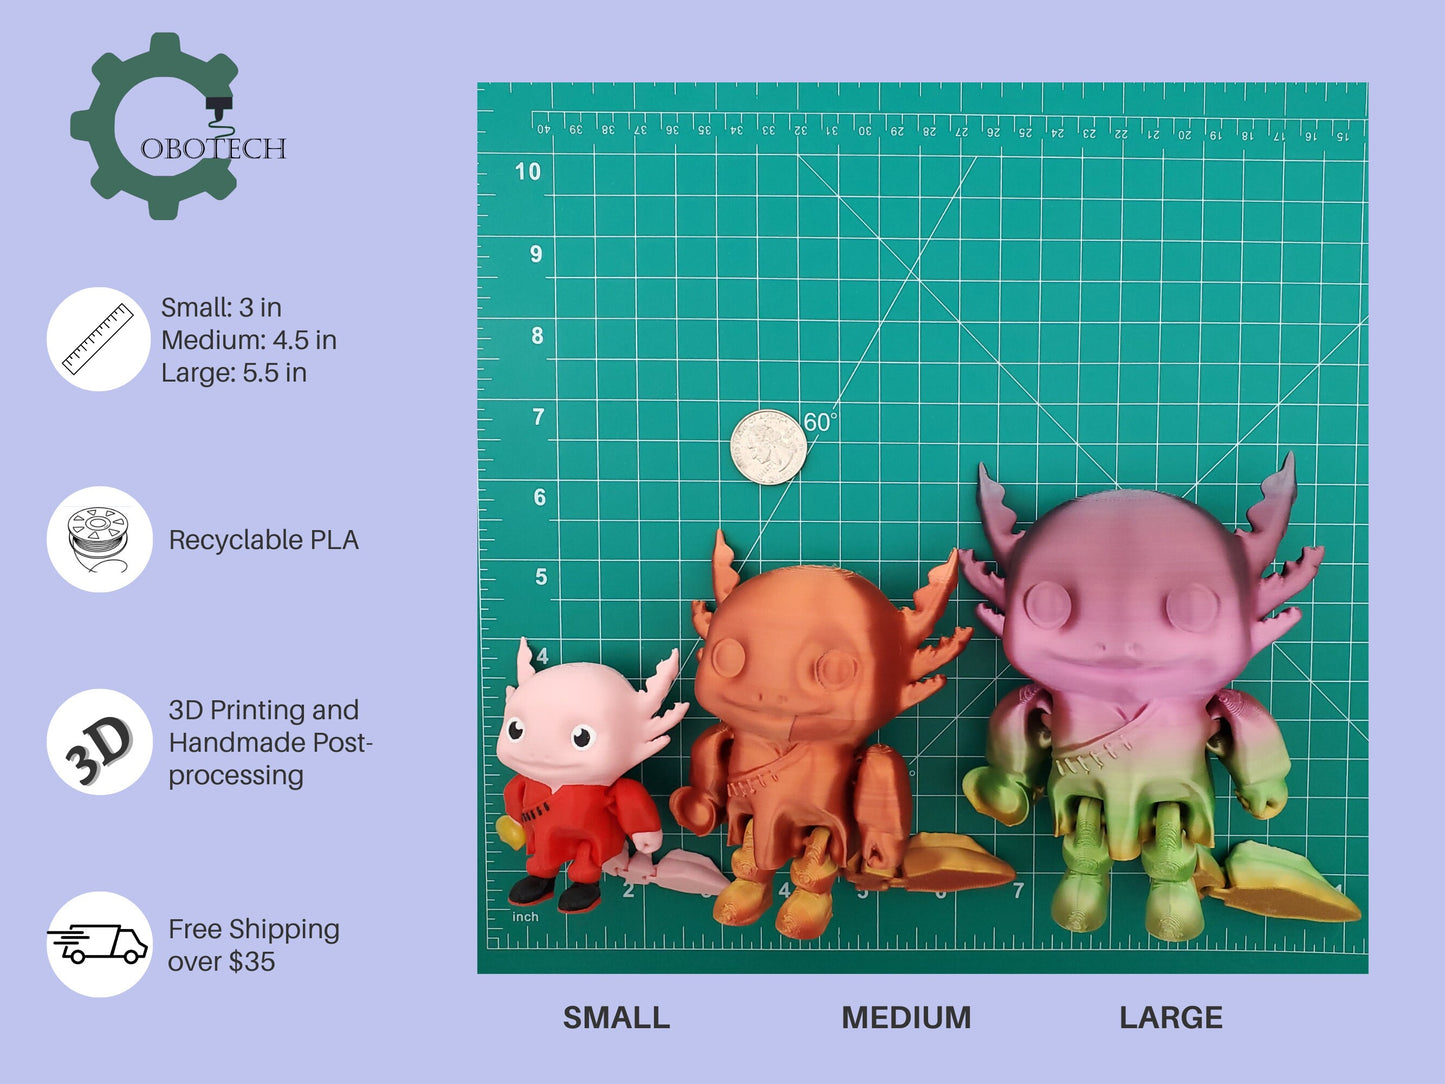 3D Print Articulated Lunar New Year Axolotl by Cobotech, Articulated Axolotl , Fidget Toy, Home/Desk Decoration, Unique Gift